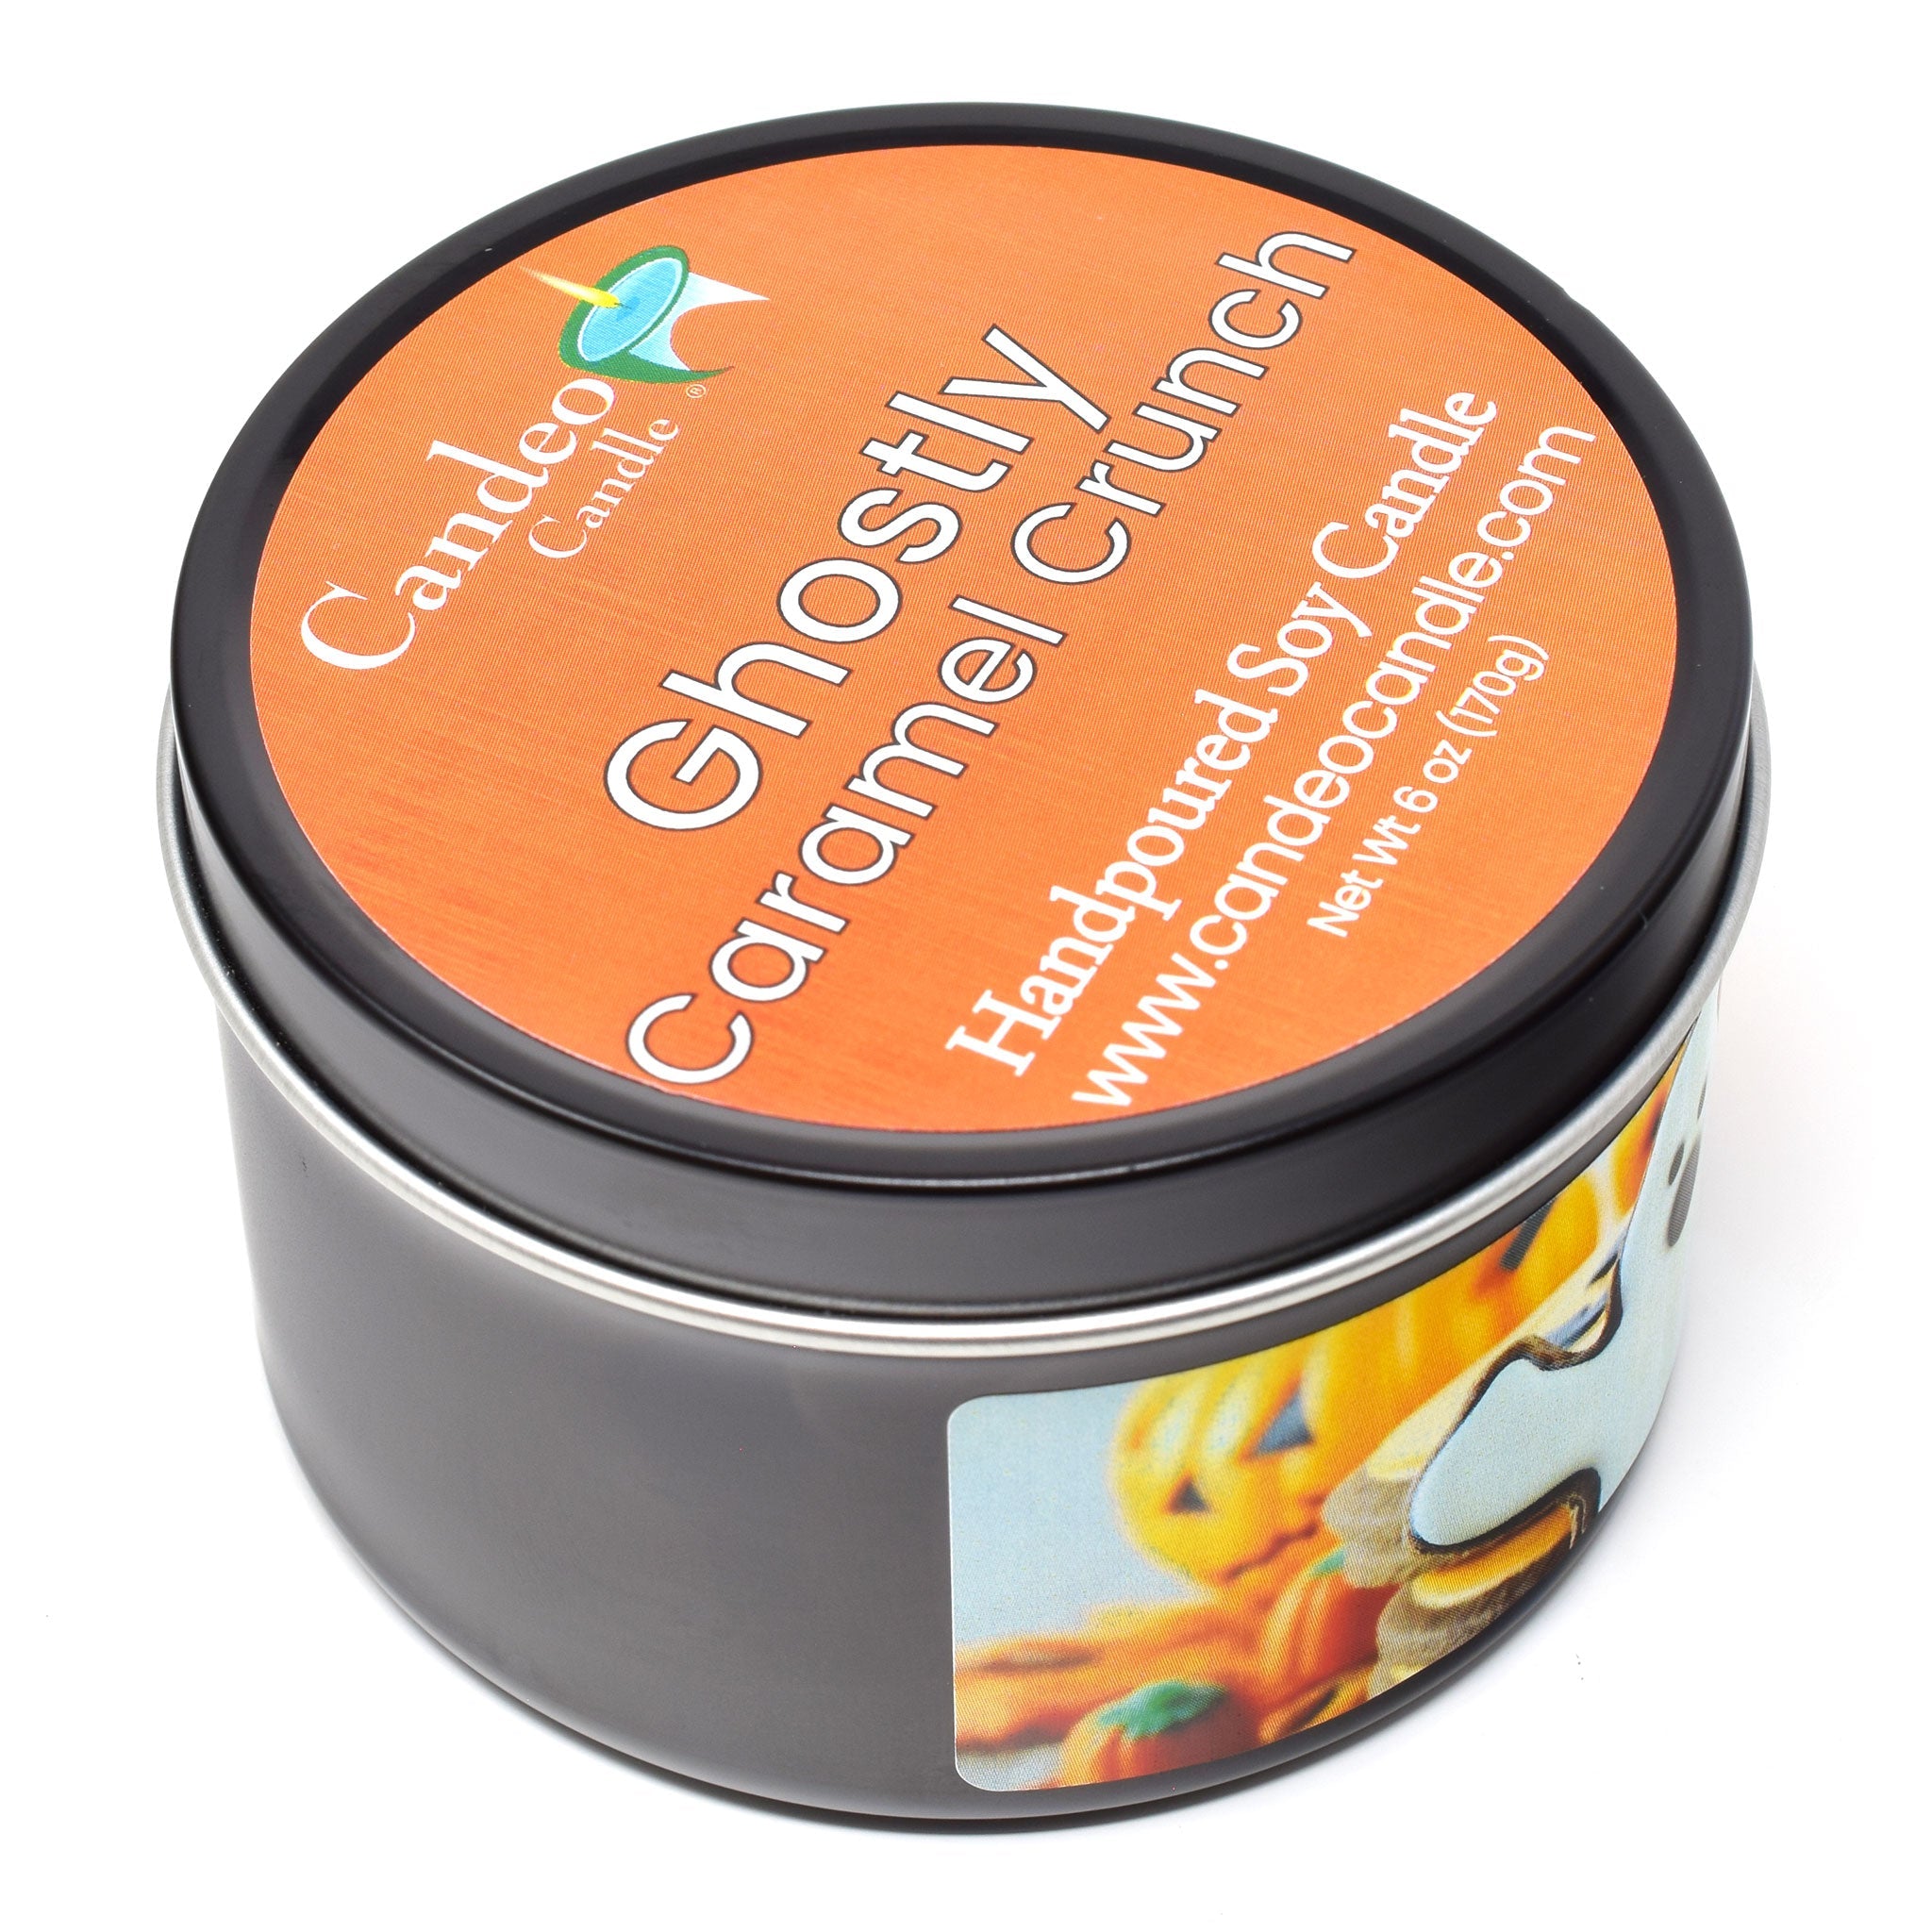 Ghostly Caramel Crunch, 6oz Soy Candle Tin - Candeo Candle